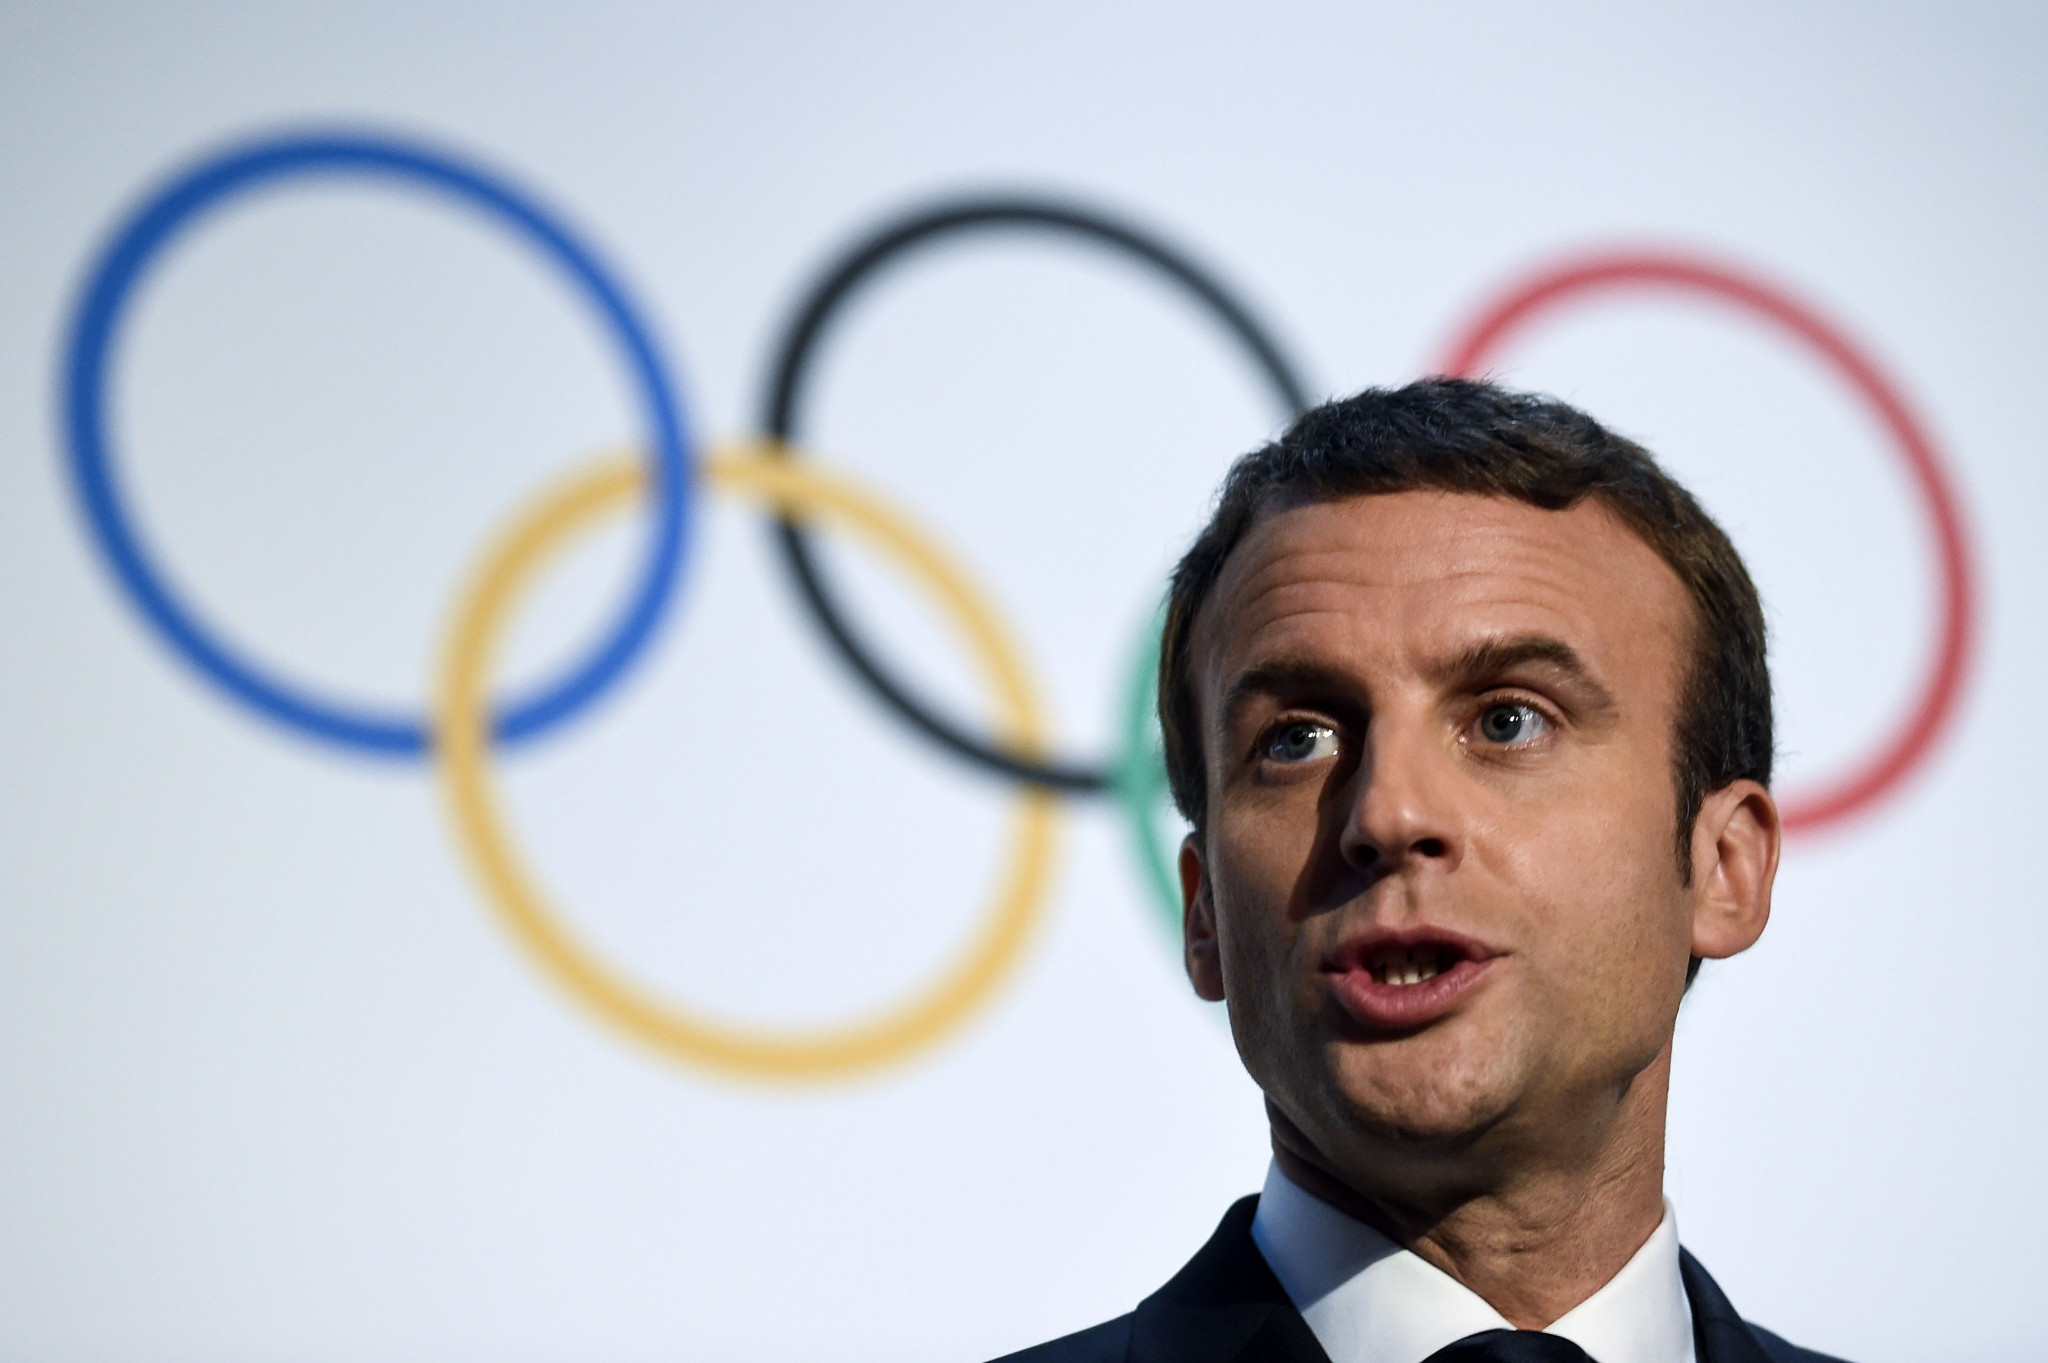 Emmanuel Macron has been urged to do more to help the sport sector in France ©Getty Images